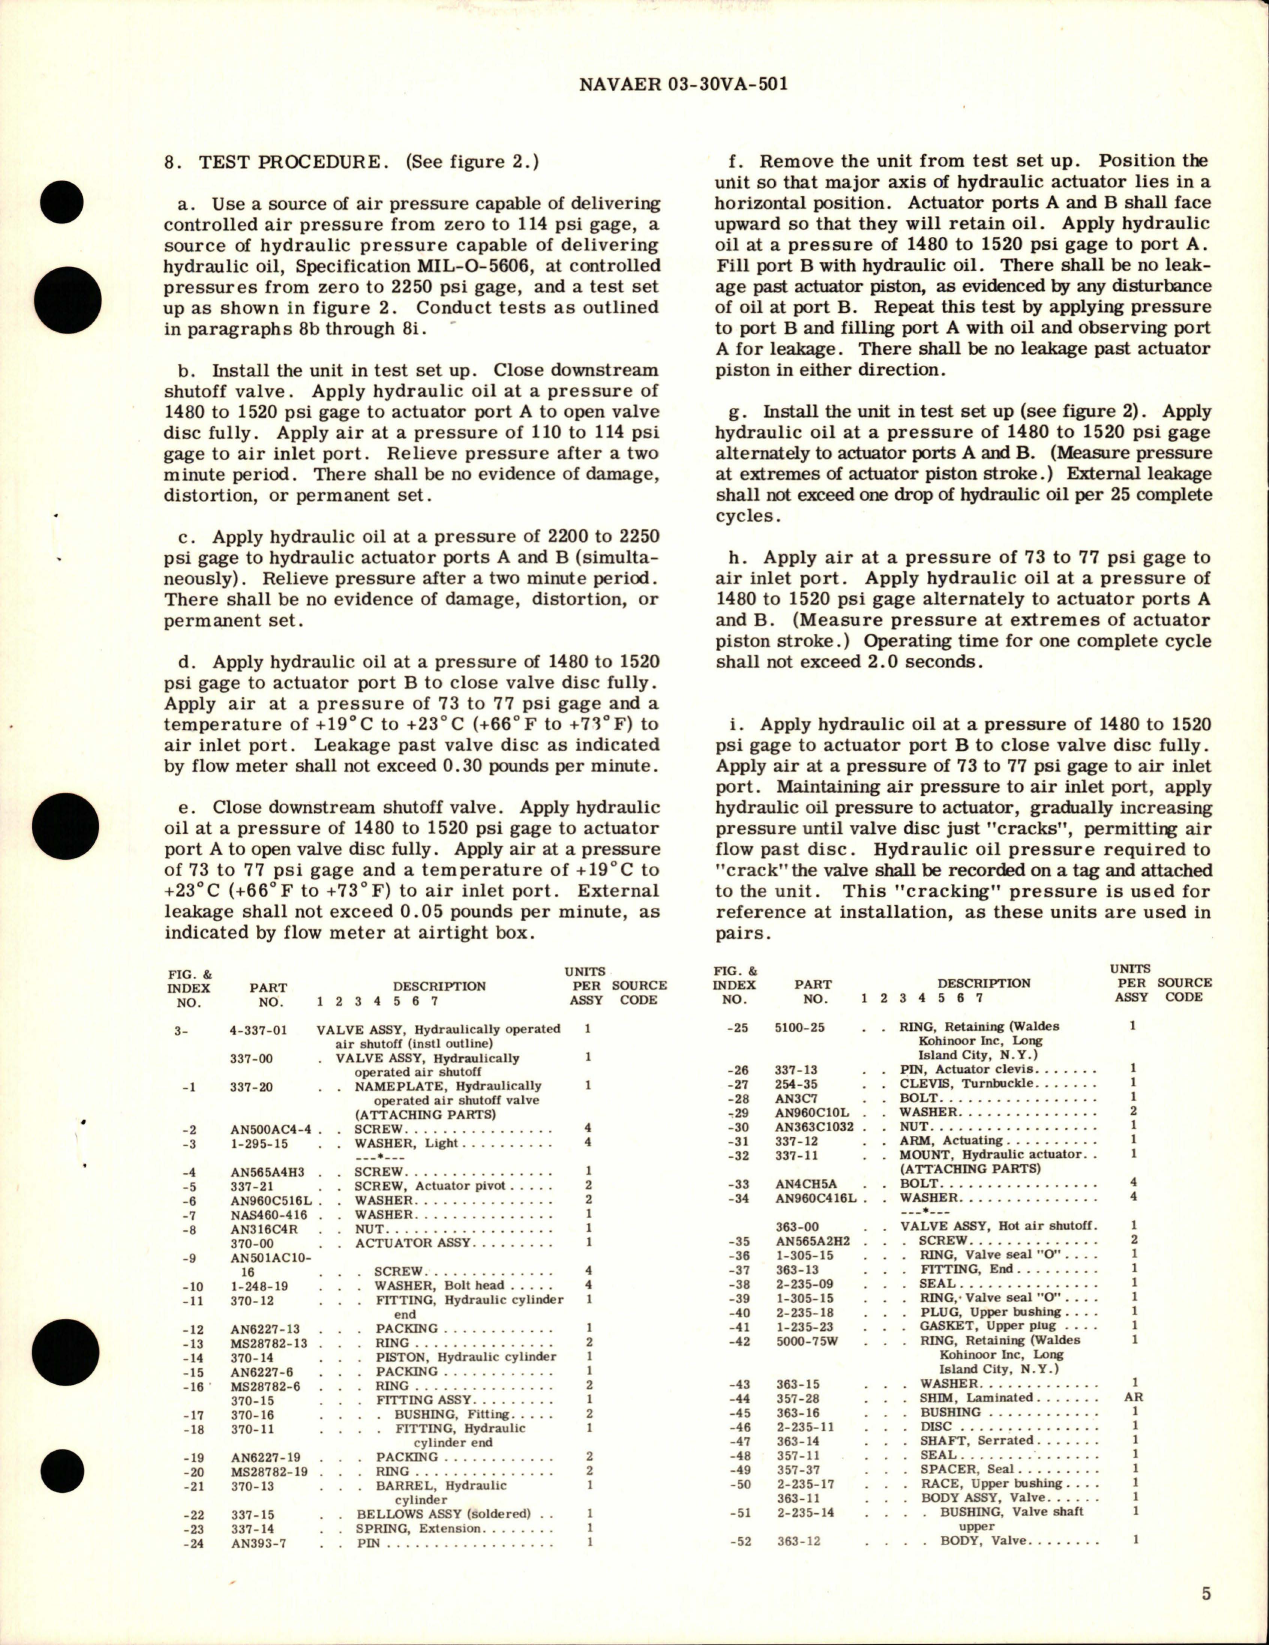 Sample page 5 from AirCorps Library document: Overhaul Instructions with Parts Breakdown for Hydraulically Operated Air Shutoff Valve - Part 4-337-01